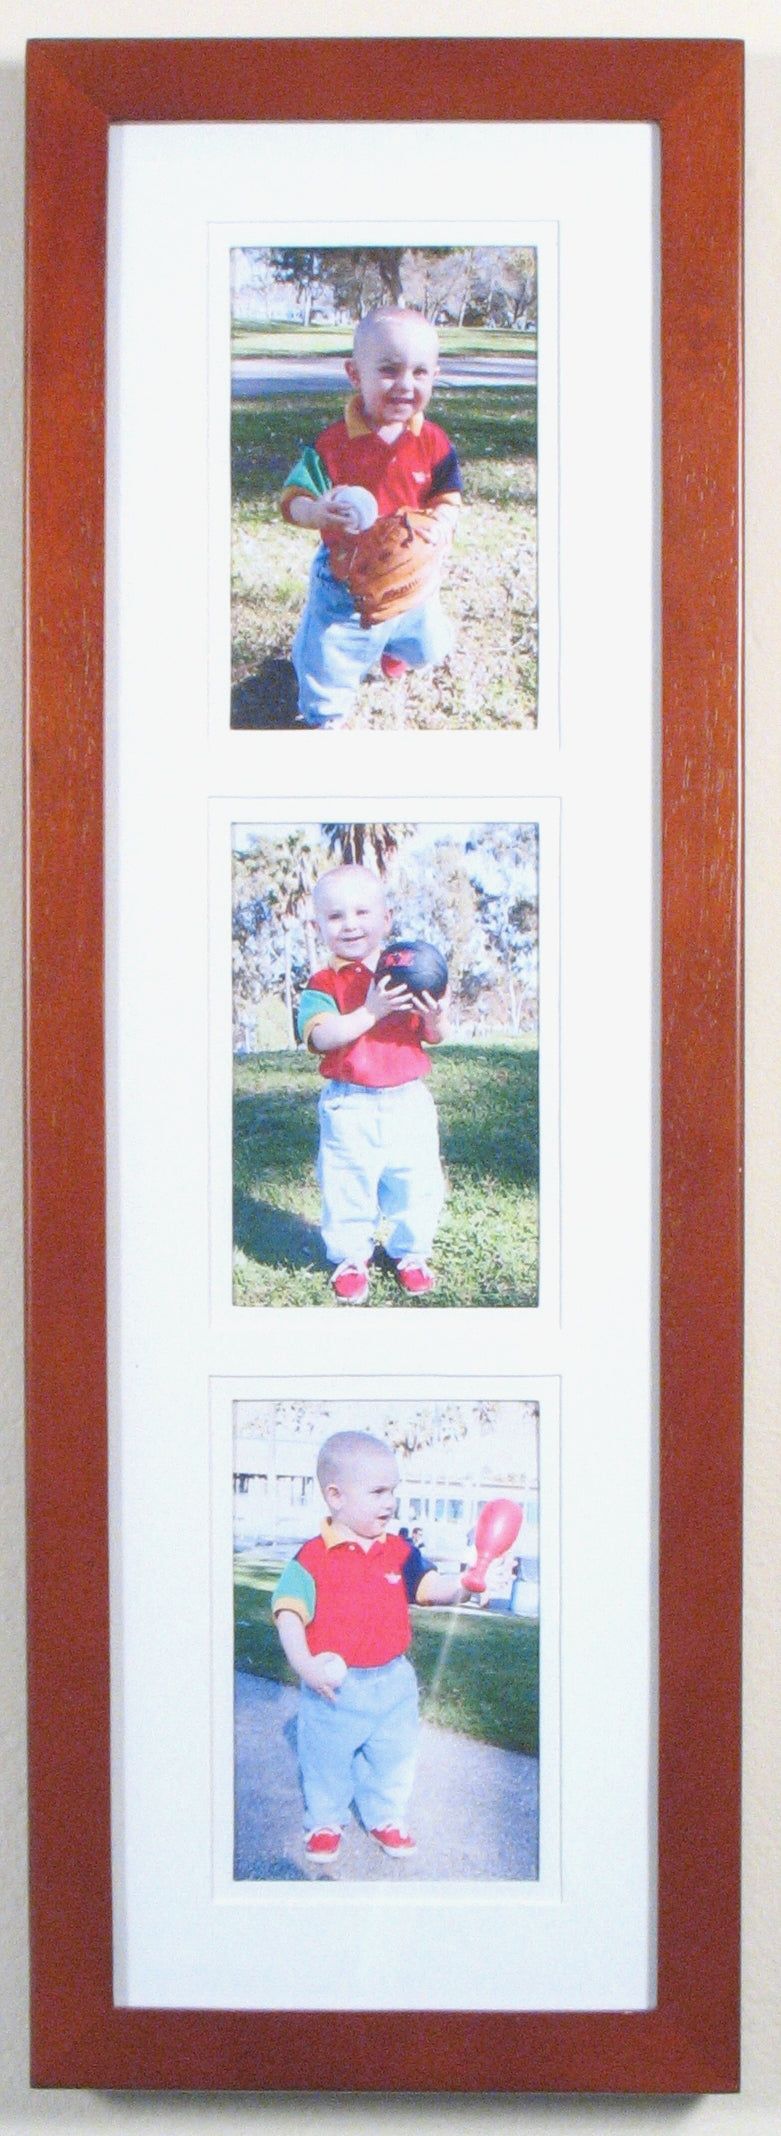 Wooden frame with Cherry finish available with white on white mat. 